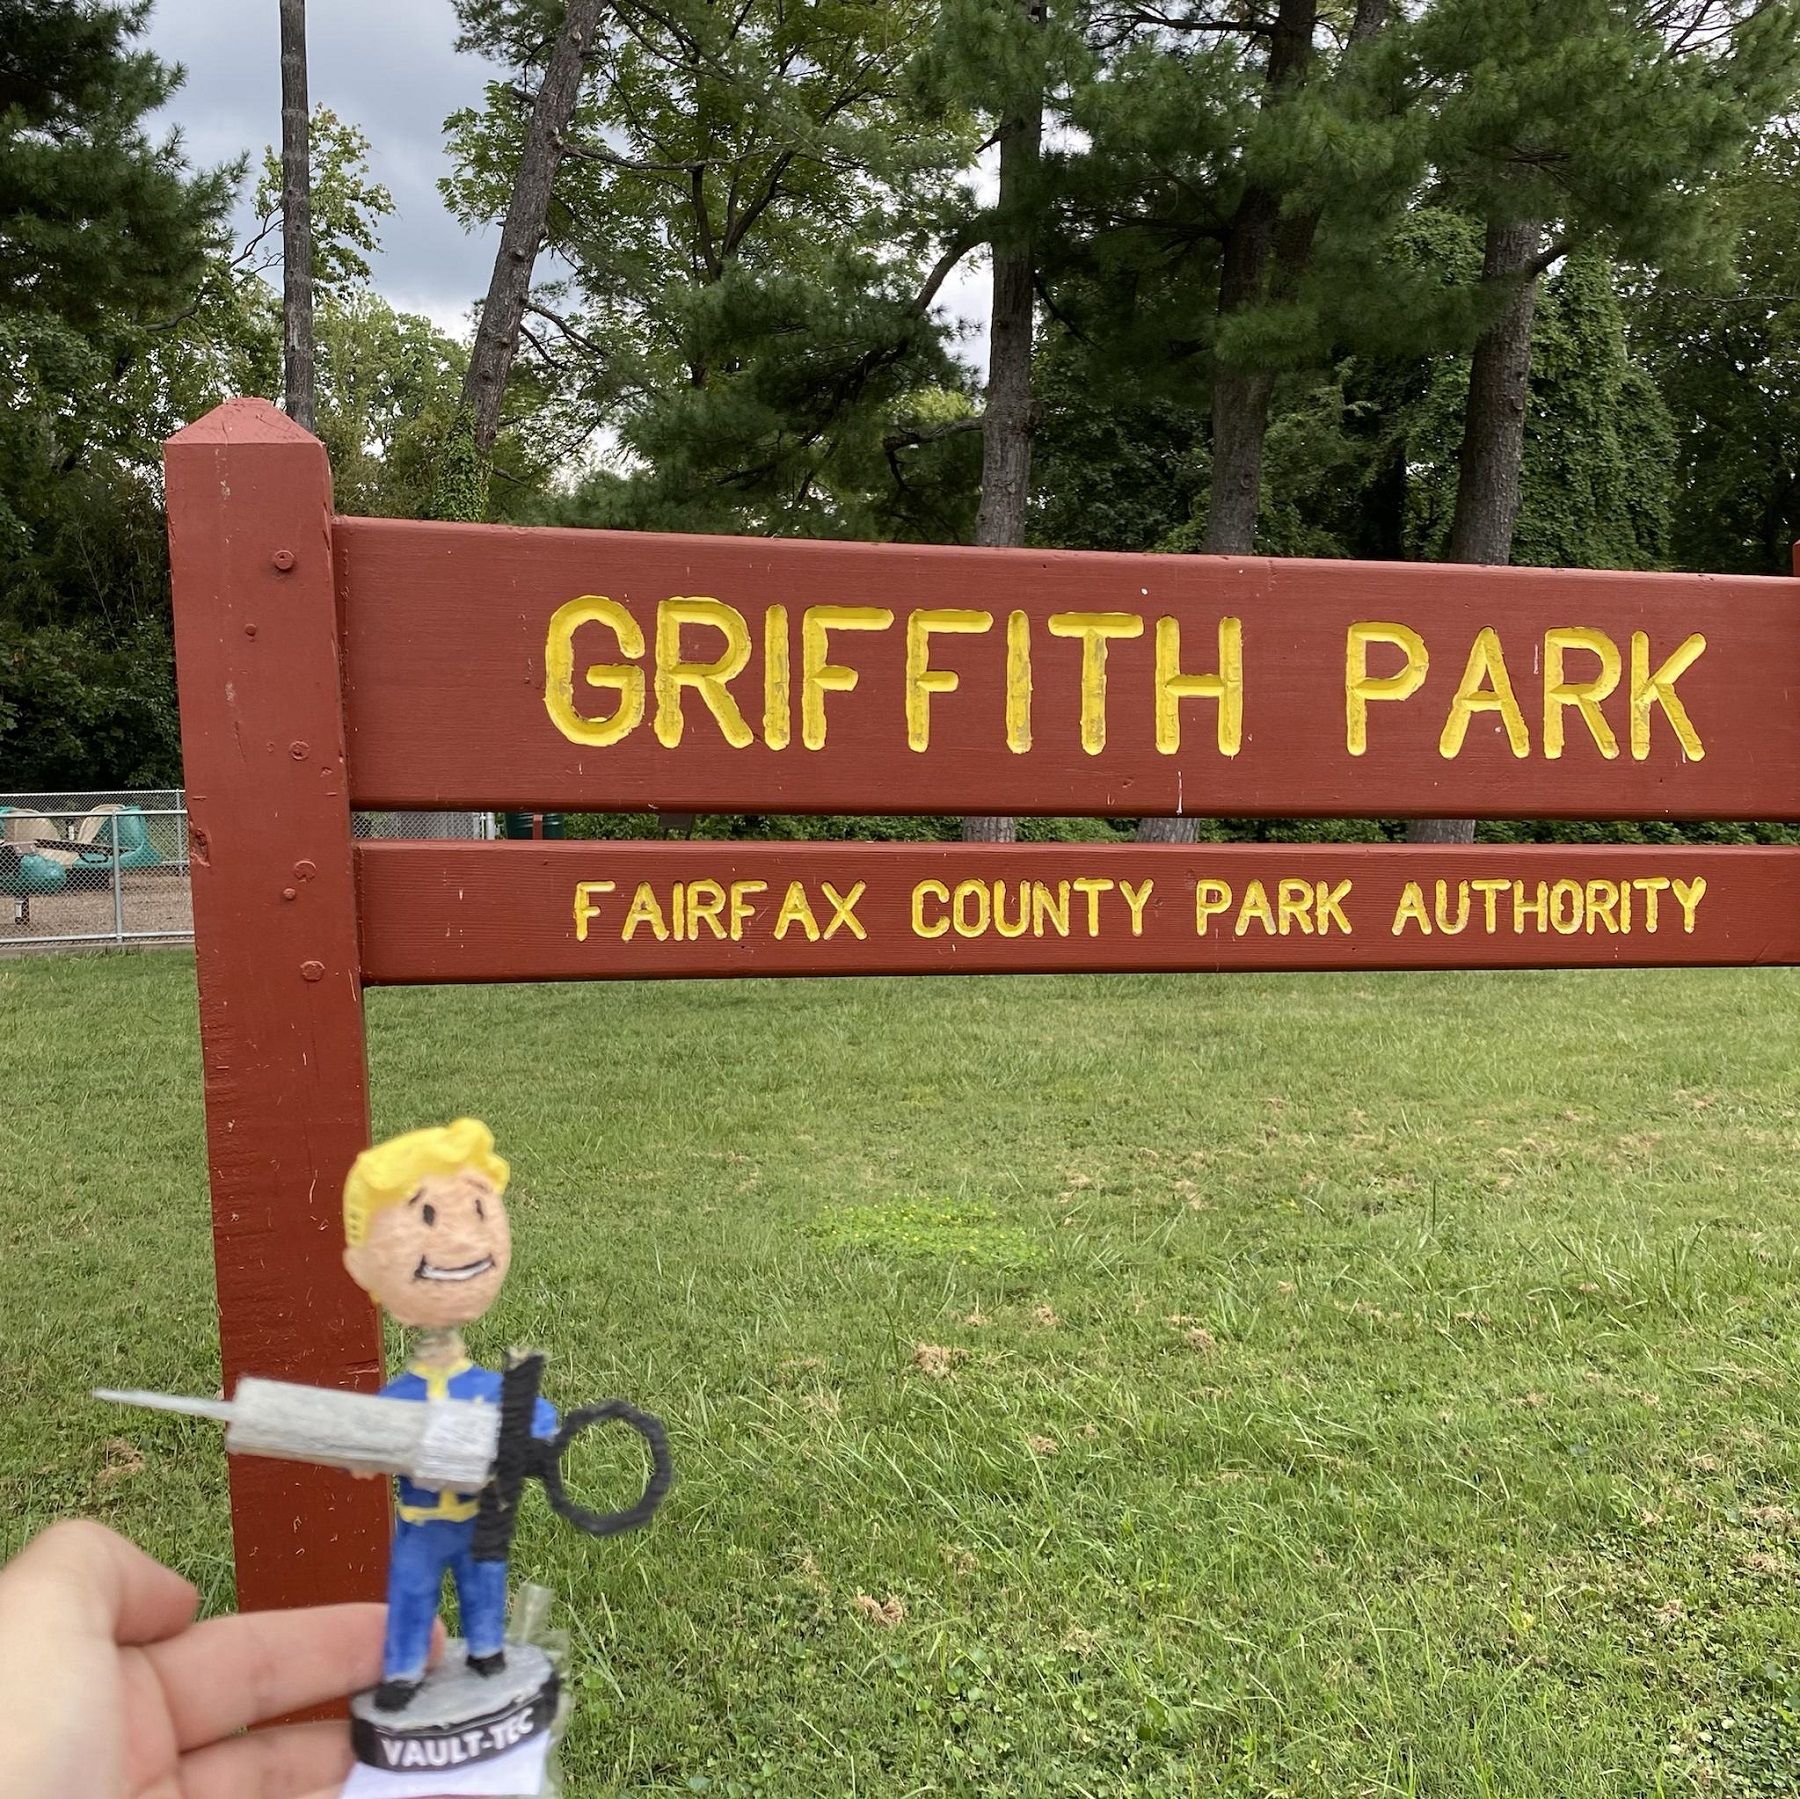 Daytime photo of a Fallout 3 bobblehead next to the Griffith Park sign.